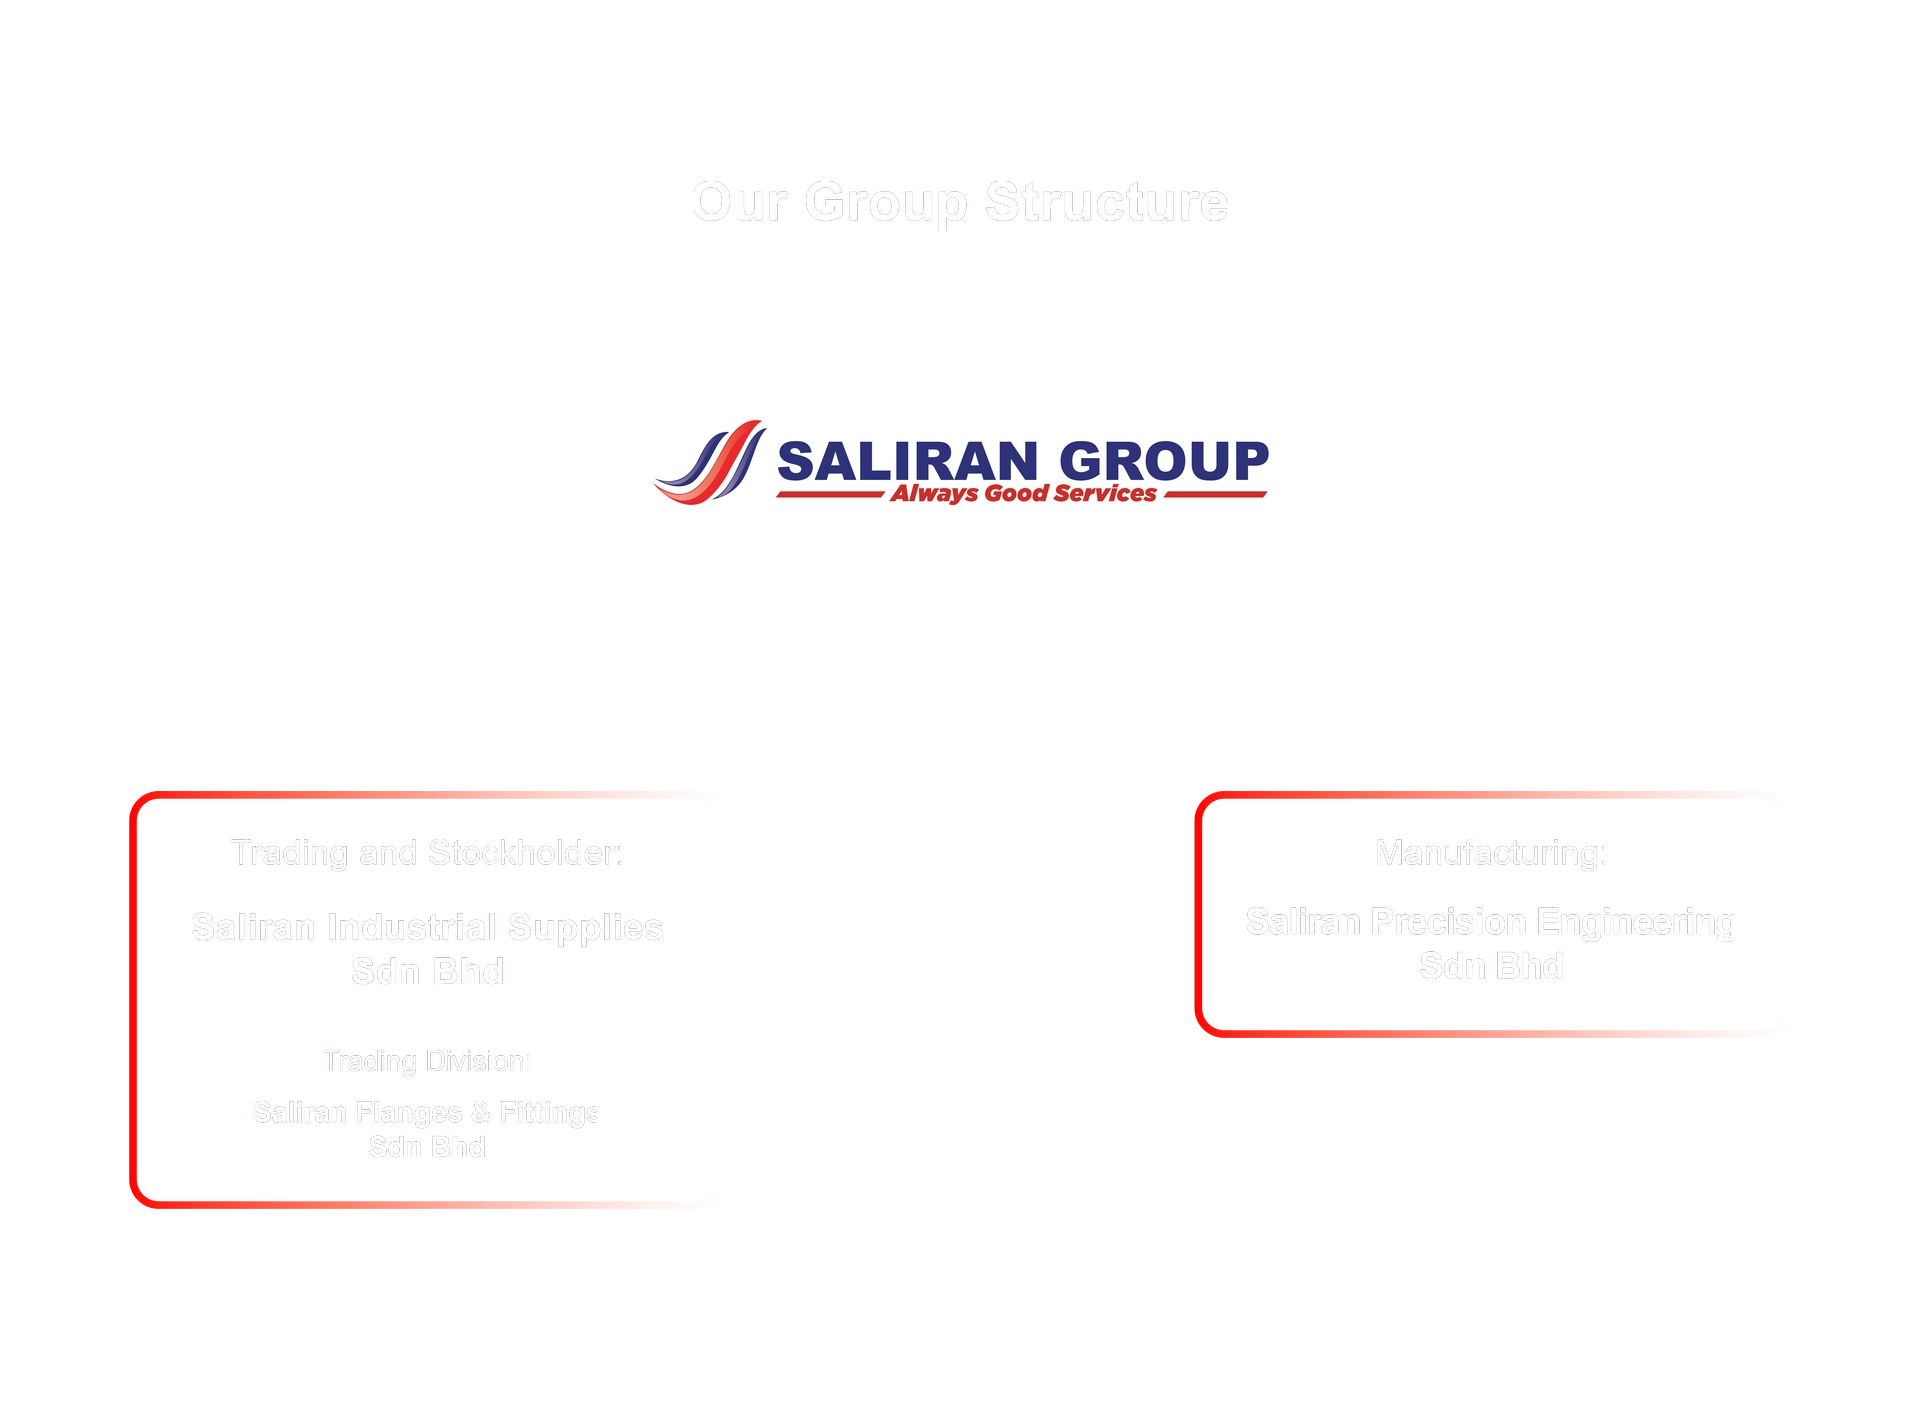 Saliran Group sells pipe, fitting and flanges